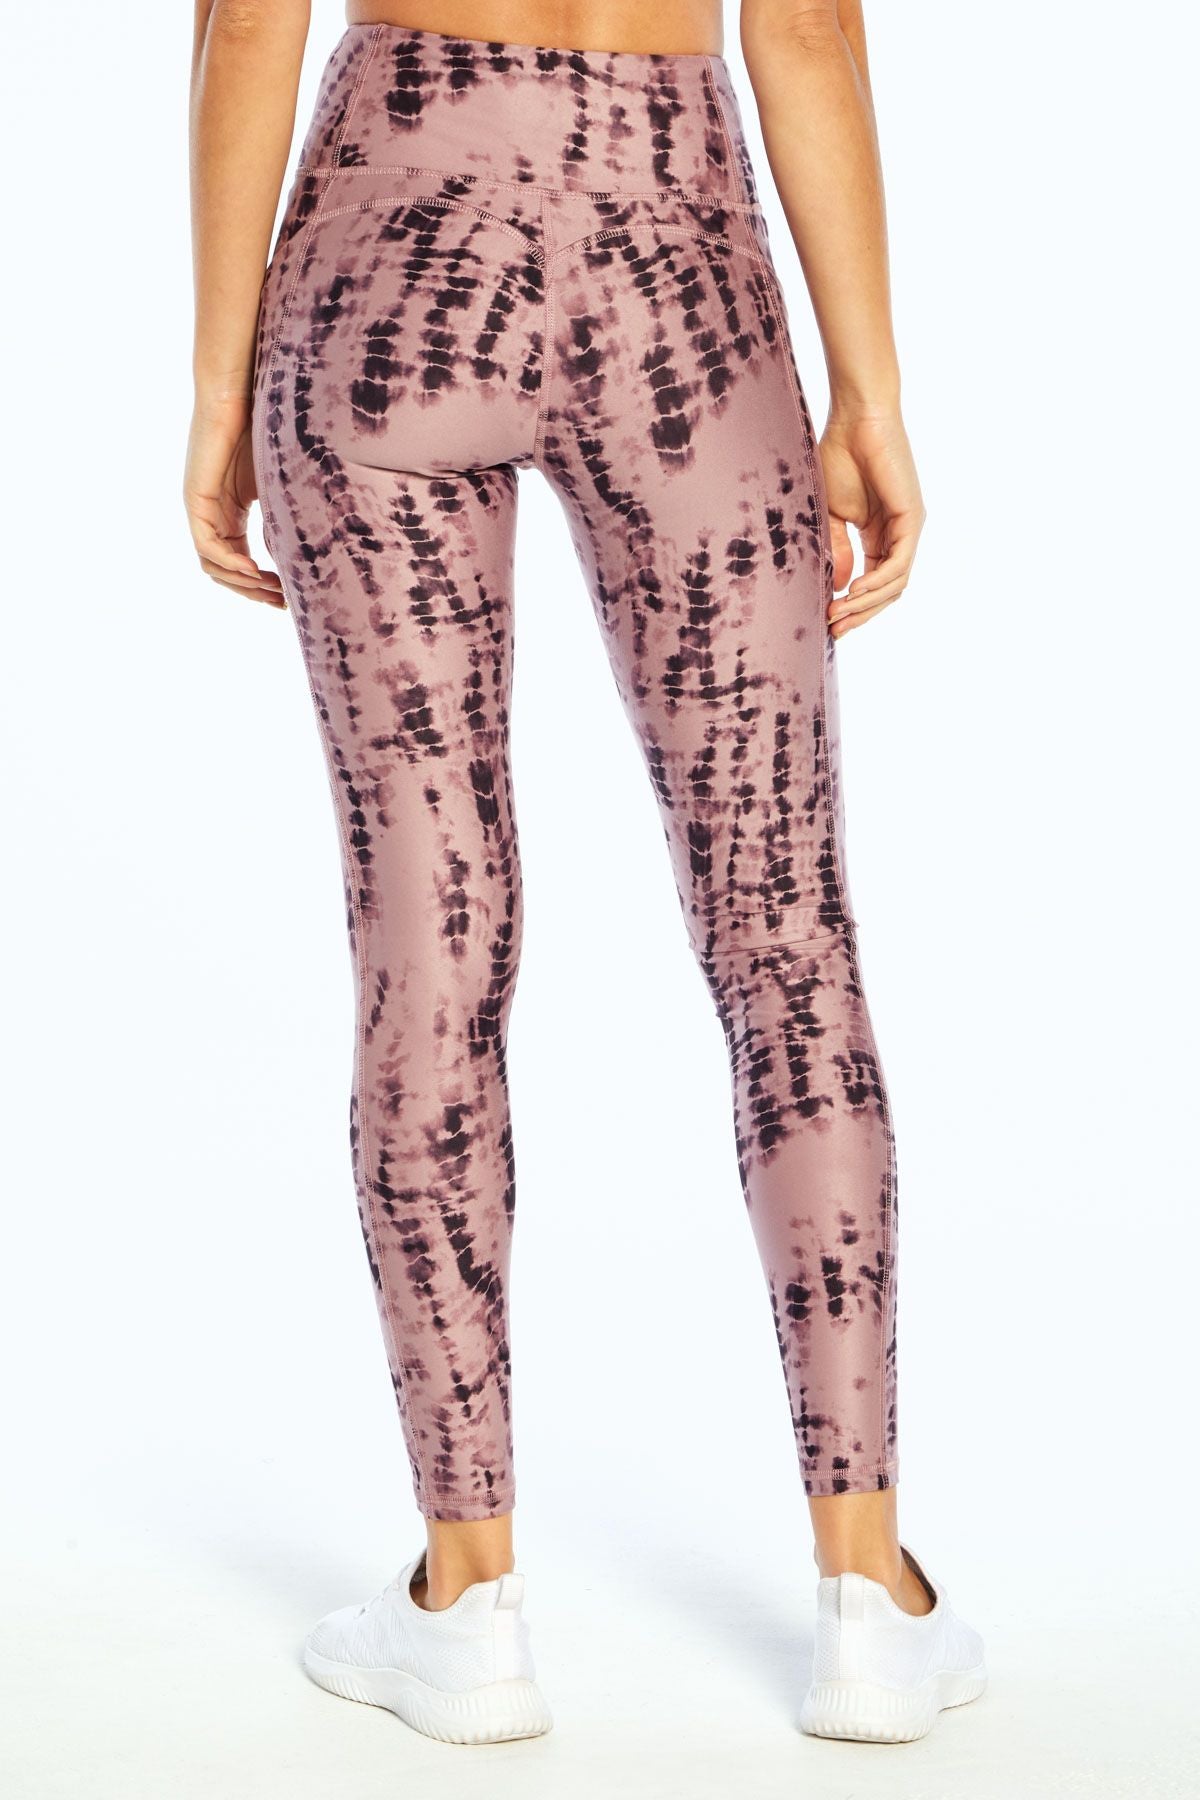 Victoria secret pink snake print workout leggings in a size small